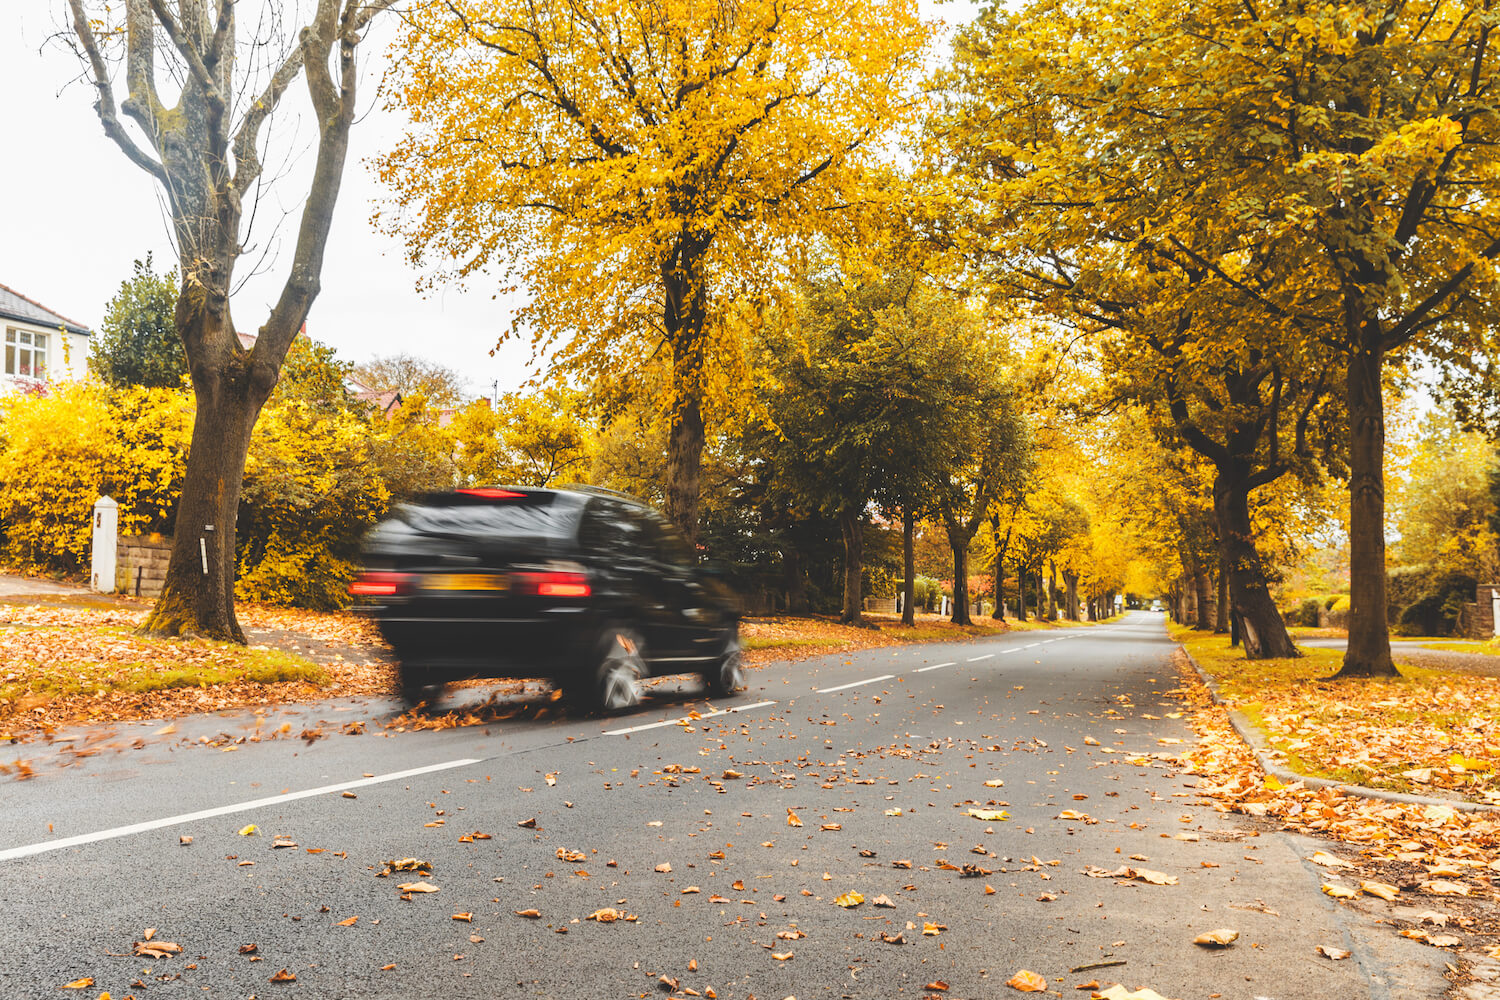 Road with blurred car passing, autumn trees and leaves all around. Travel and nature concepts together in this image.